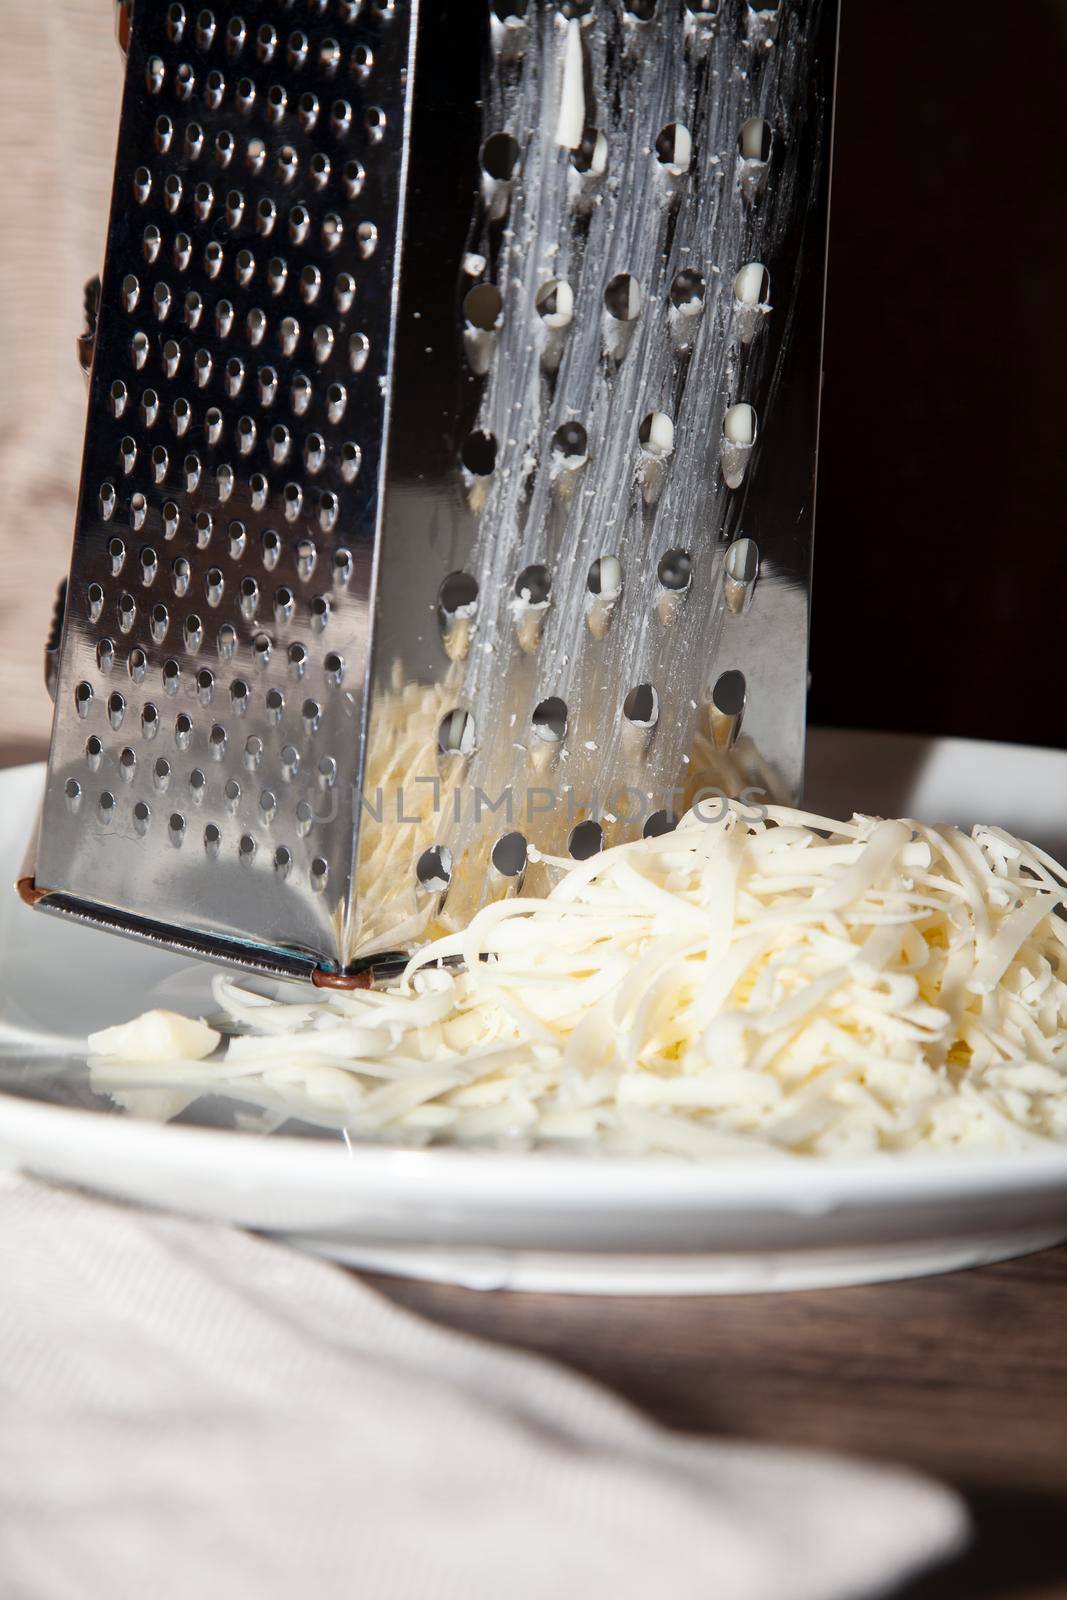 Pile of shredded white cheese next to a large, metal cheese grater on a white plate next to a tan napkin on a wooden table